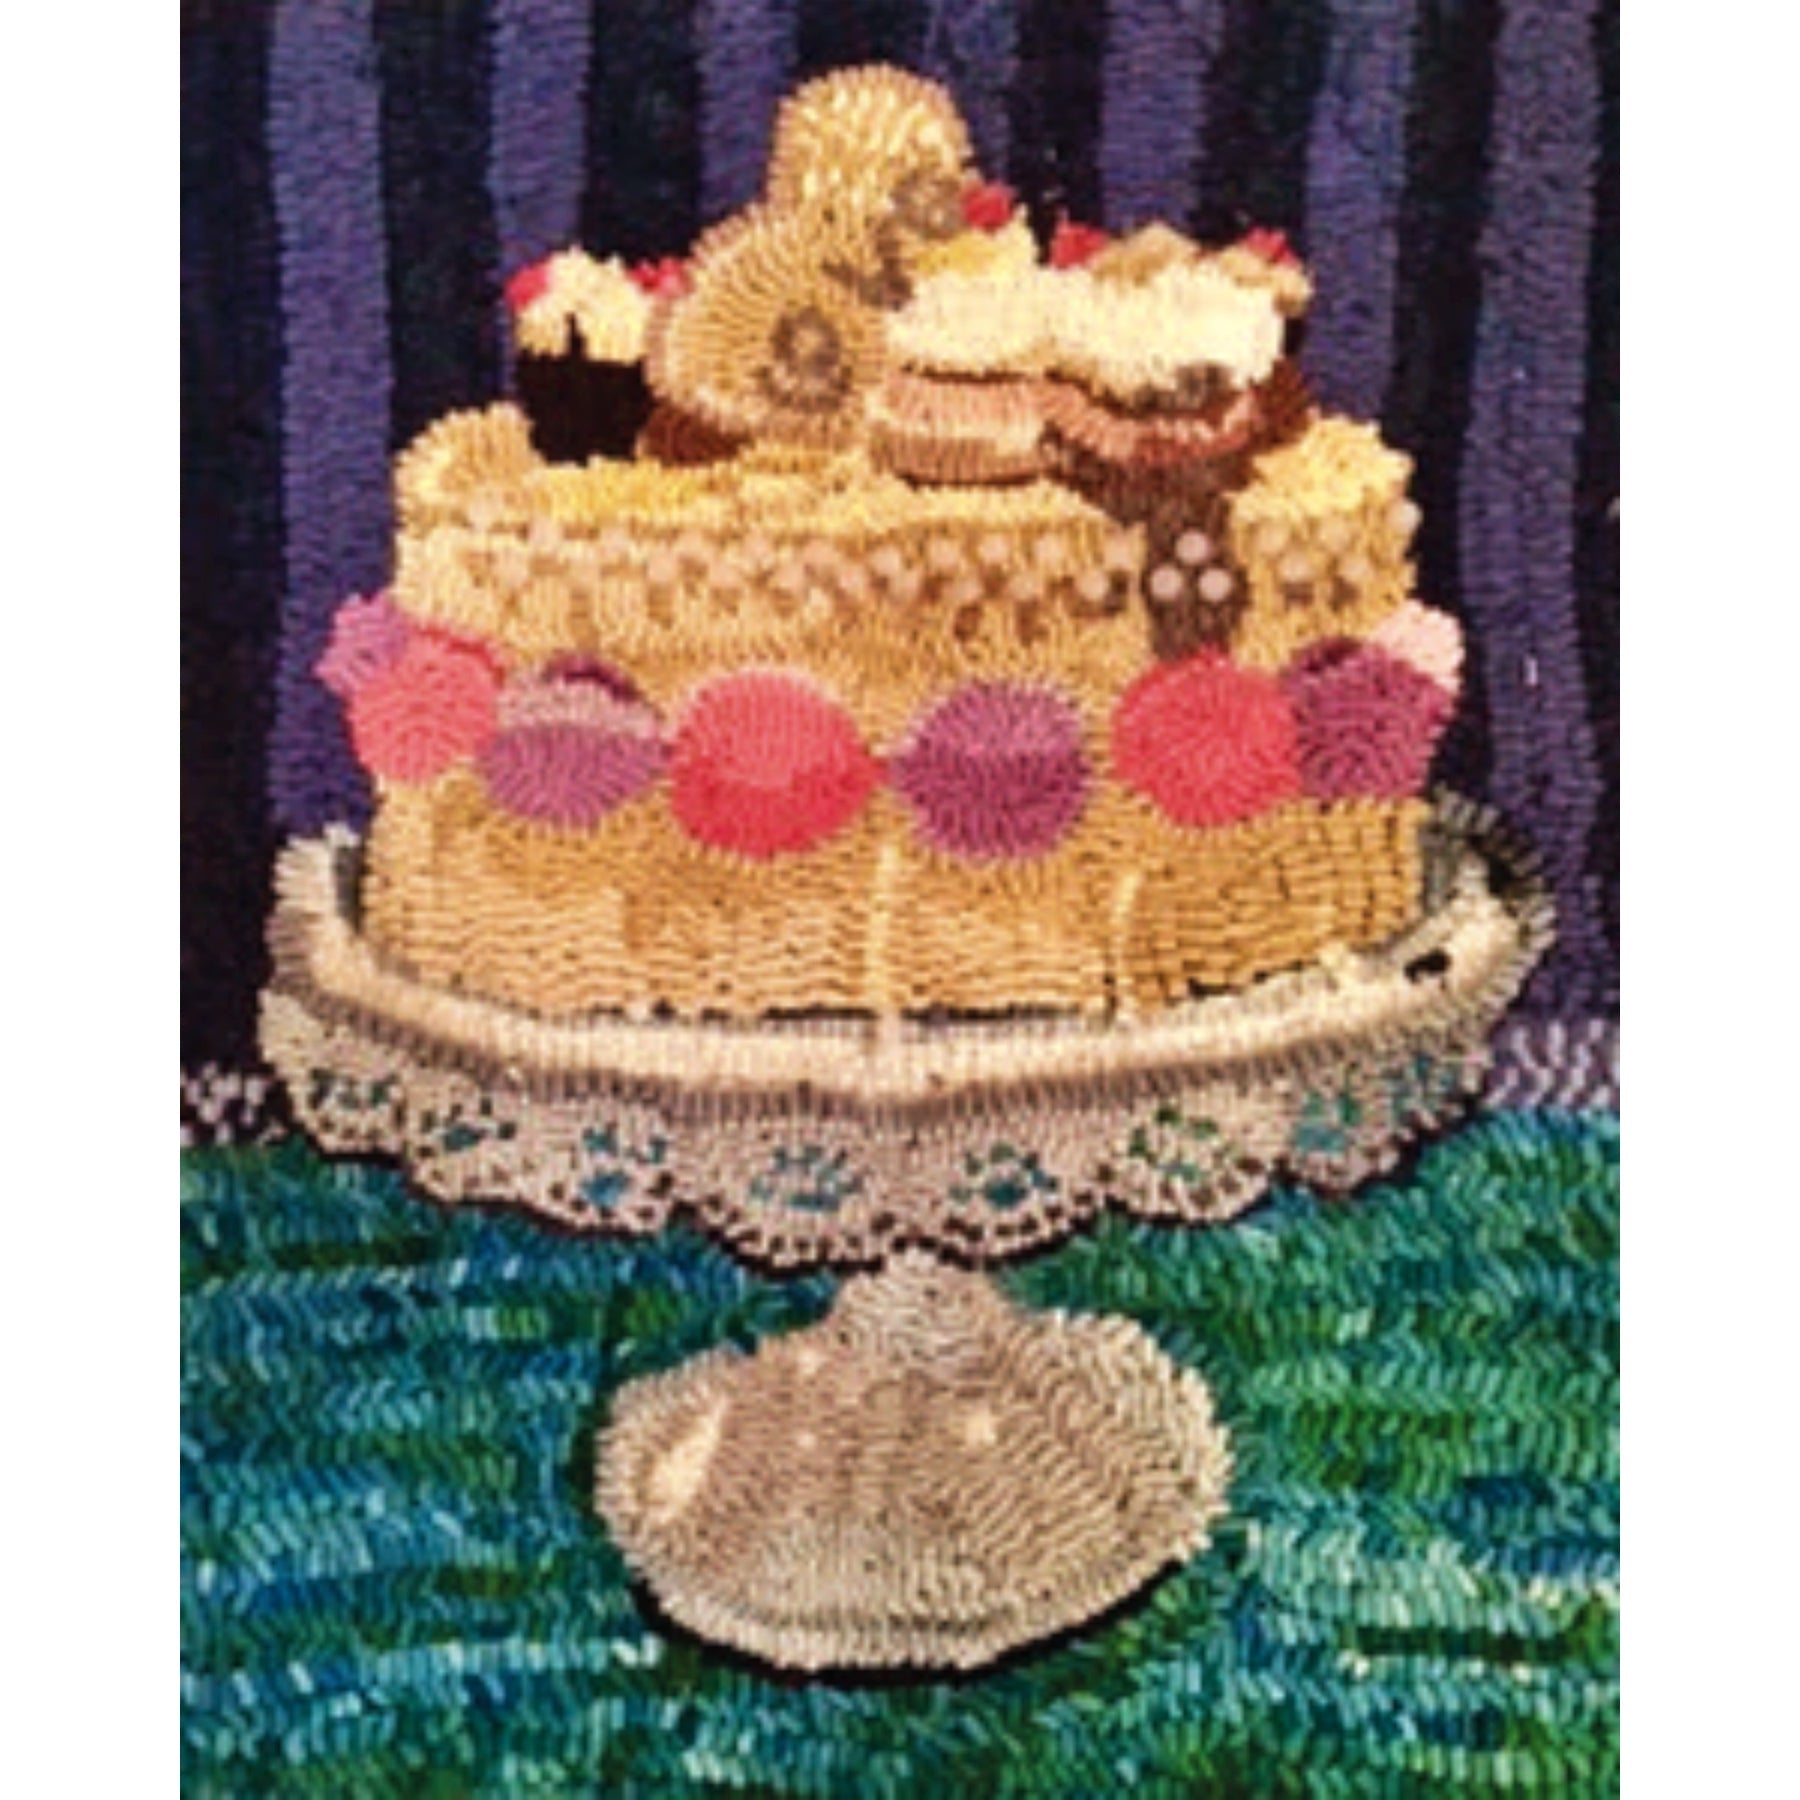 Macaroon Cake, rug hooked by Victoria Rudolph